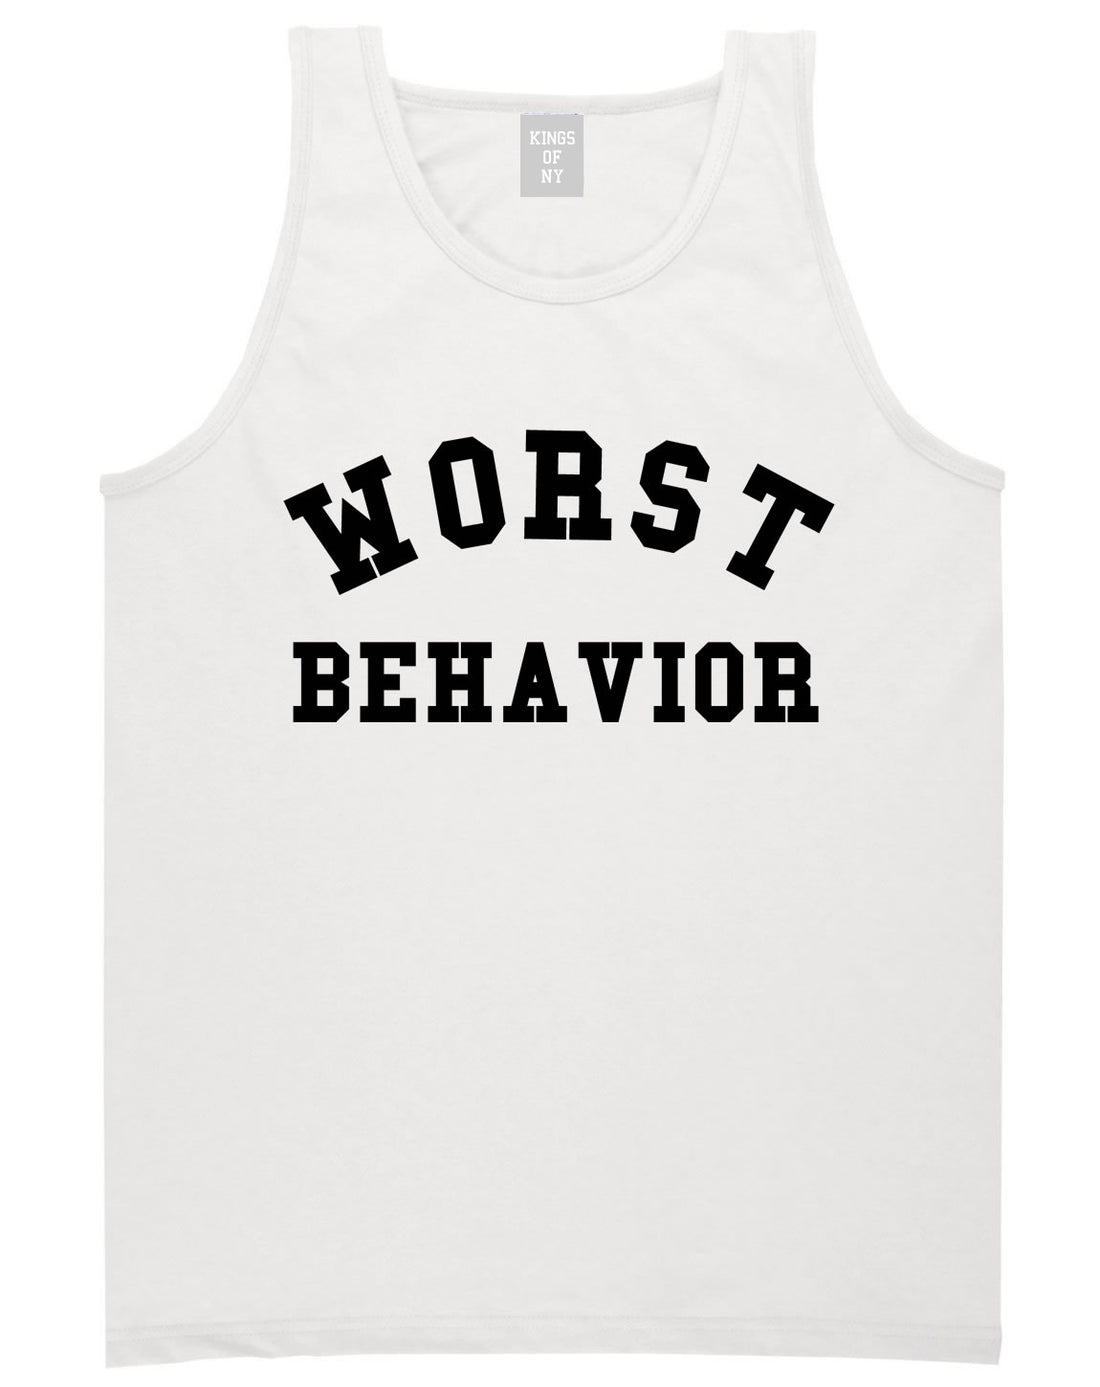 Worst Behavior Tank Top in White by Kings Of NY